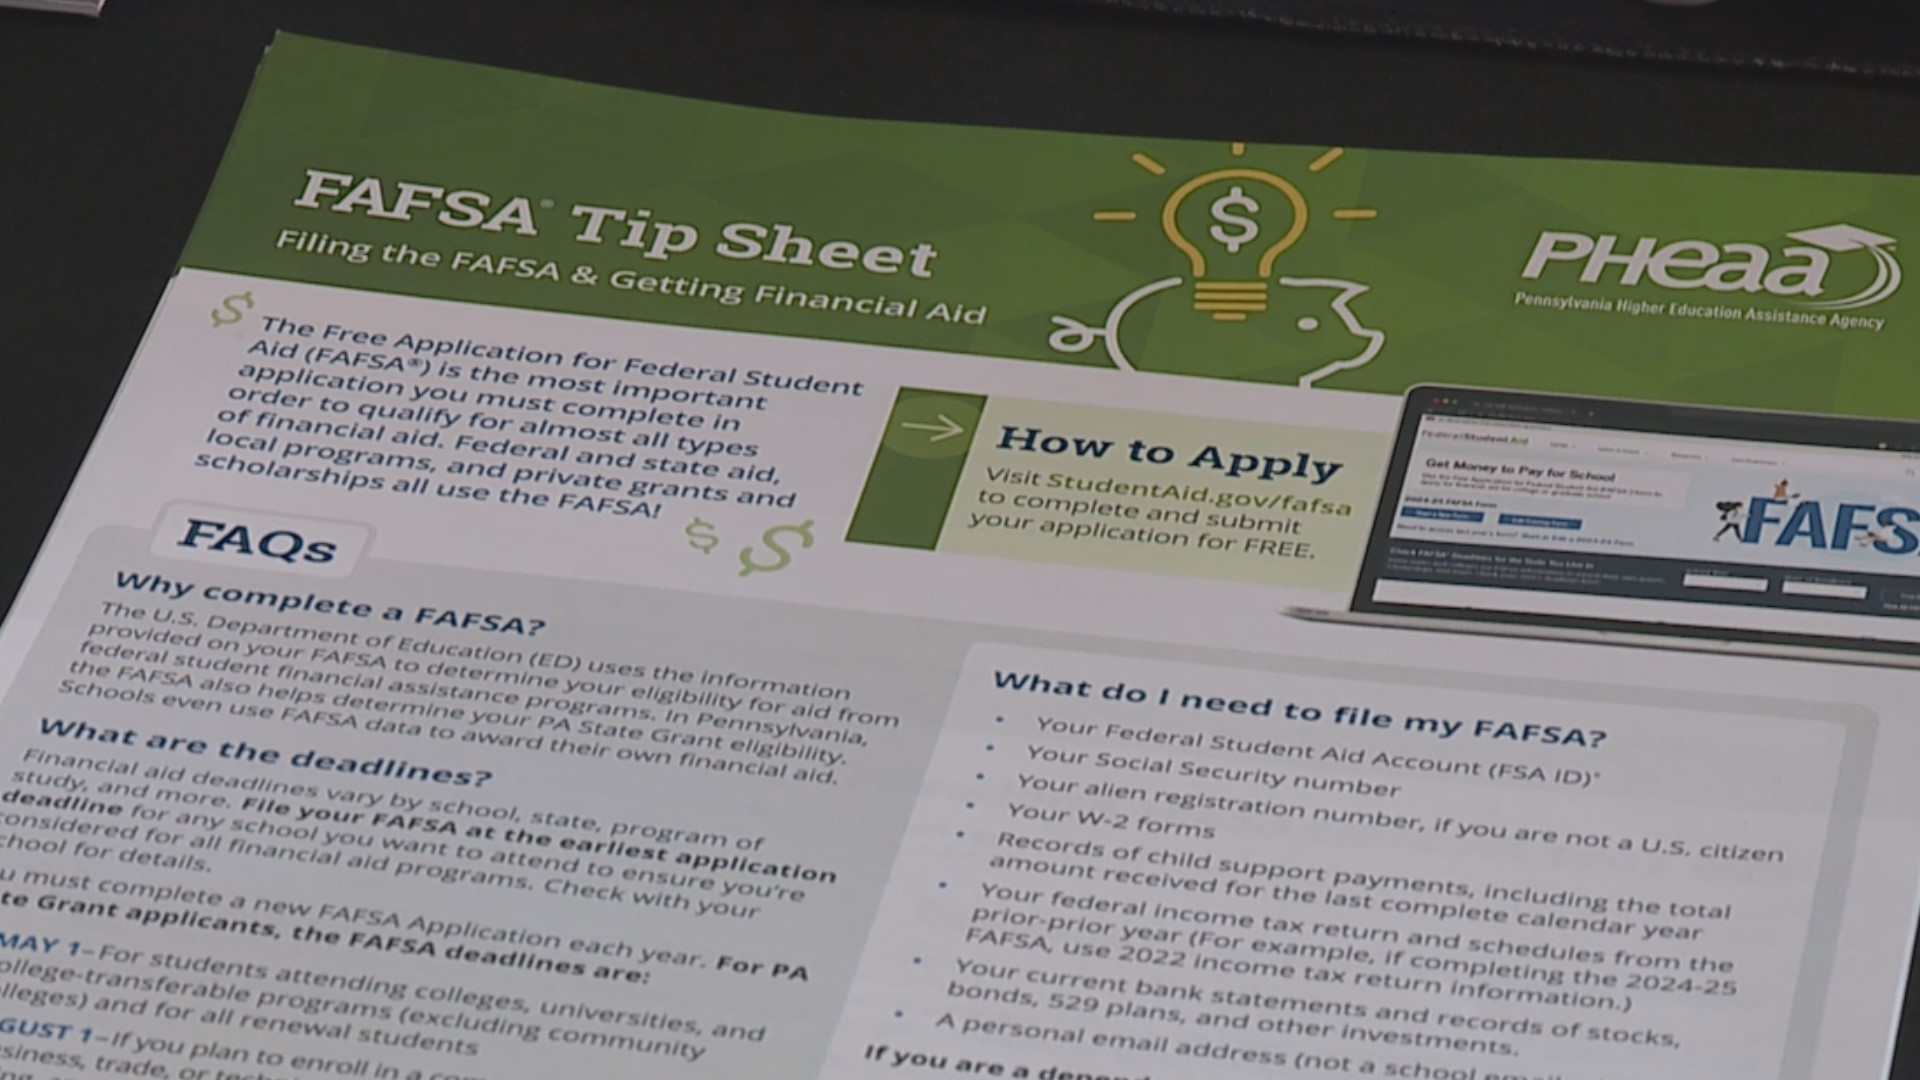 The Department of Education launched a new version of the FAFSA this year, which caused delays and issues.